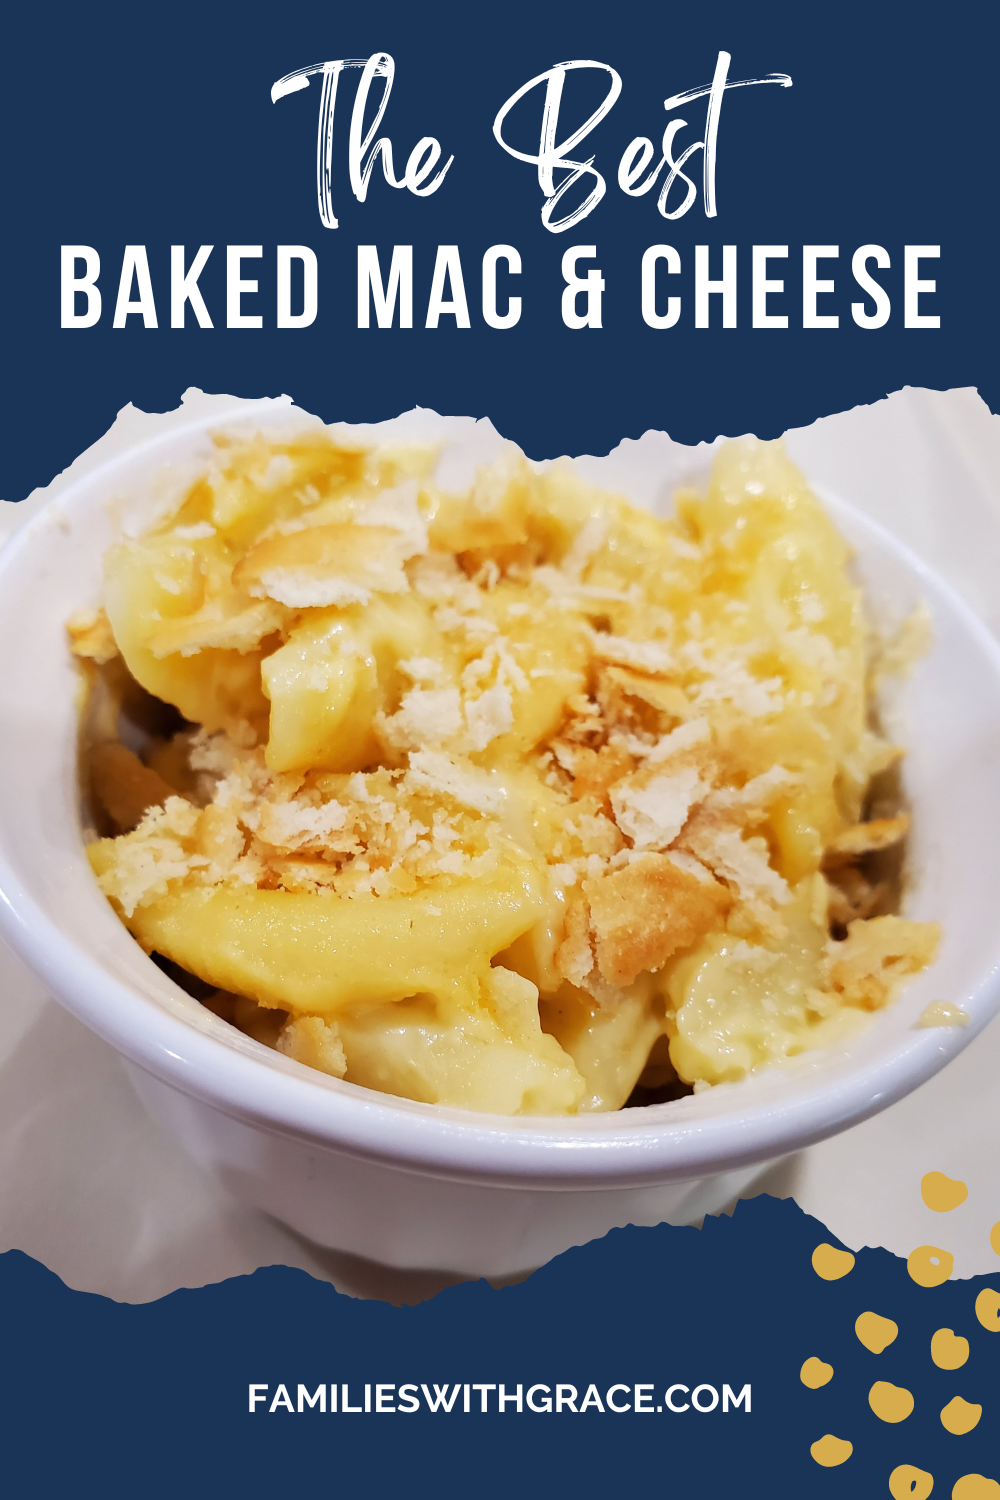 The best baked mac and cheese with Ritz cracker topping